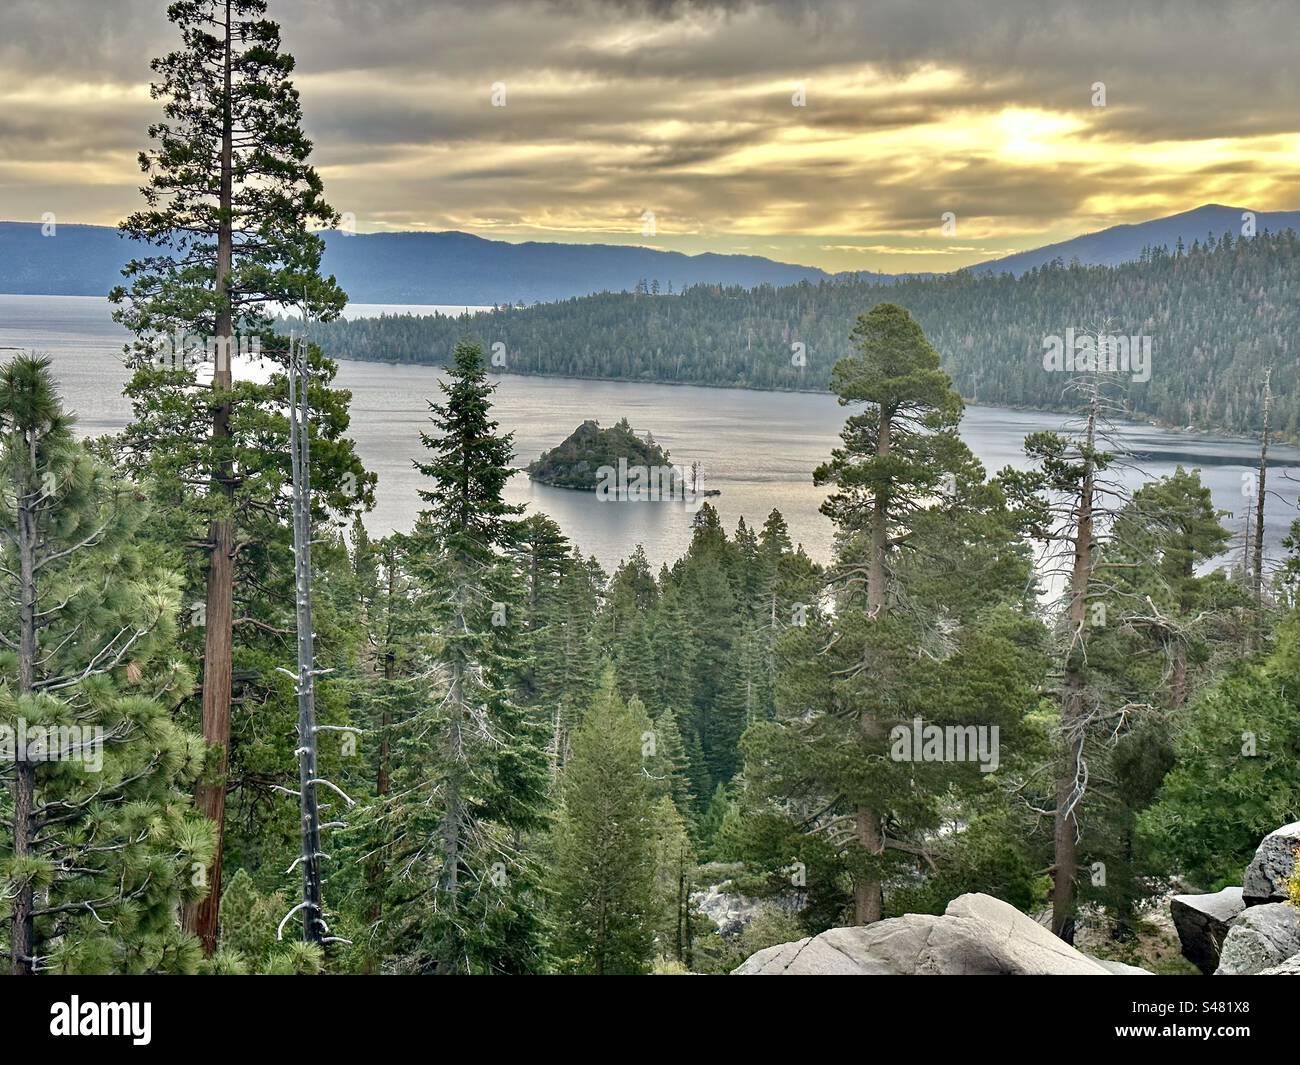 View of Fannette Island in Emerald Bay, Lake Tahoe, on a cloudy morning. Stock Photo